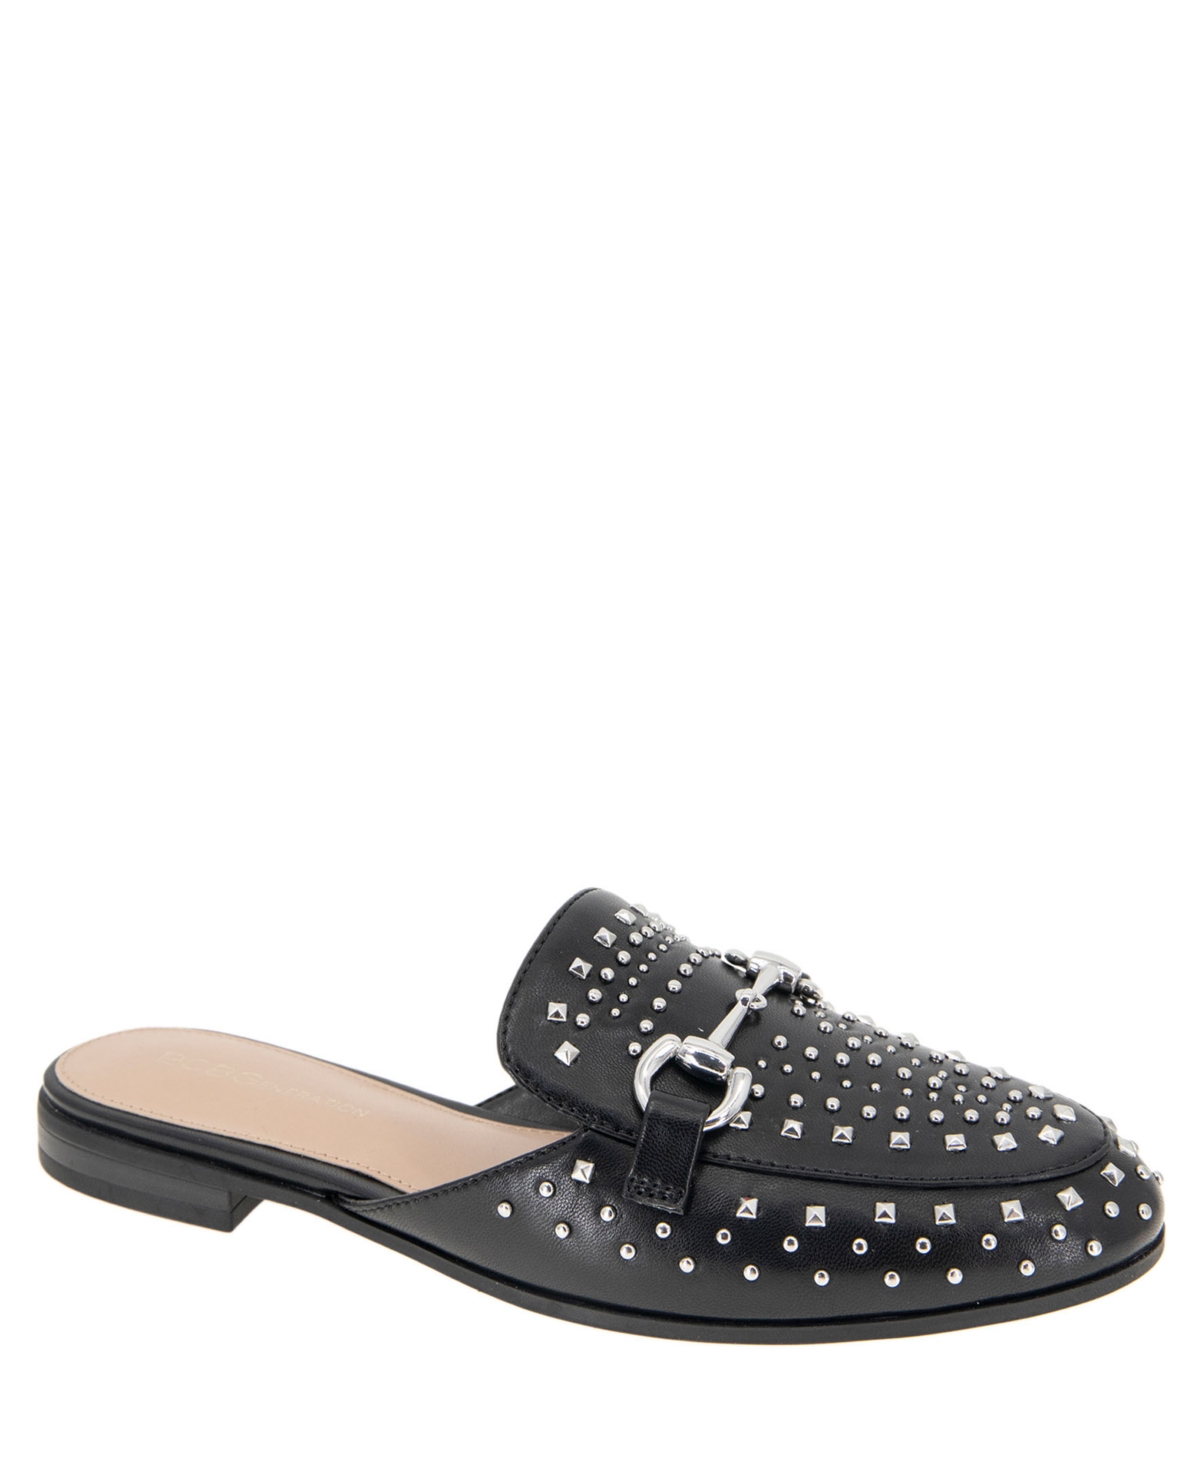 Women's Zorie Tailored Studded Slip-On Loafer Mules - Black/Studs